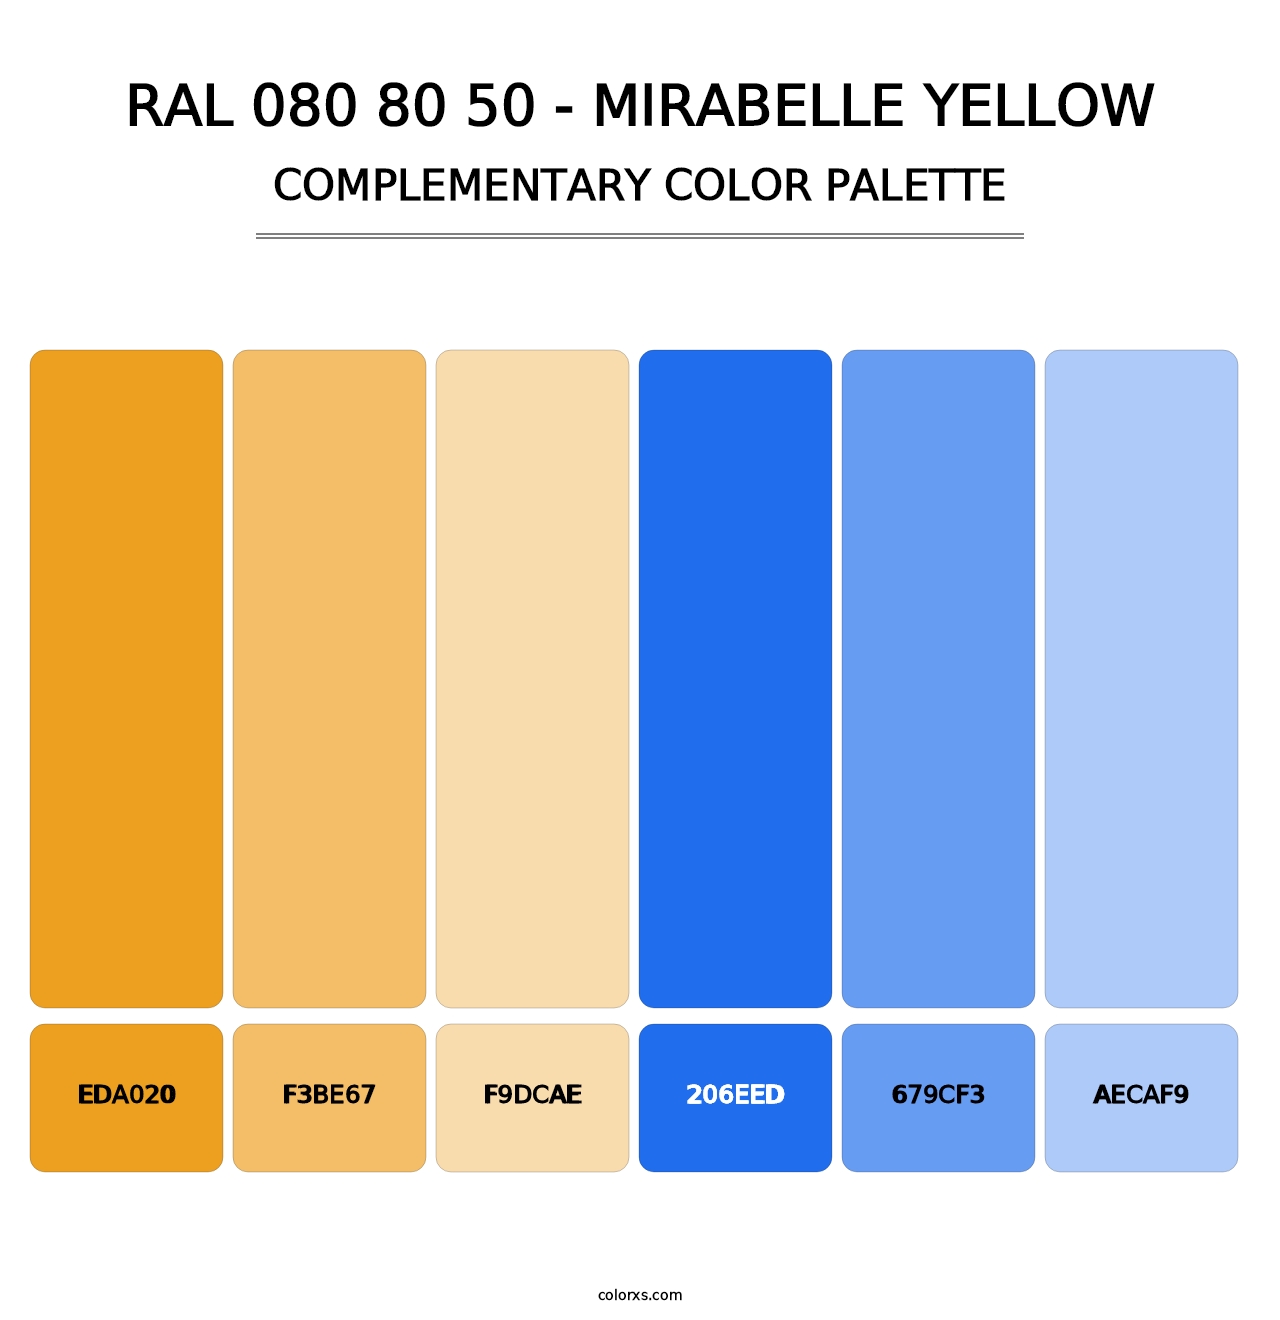 RAL 080 80 50 - Mirabelle Yellow - Complementary Color Palette